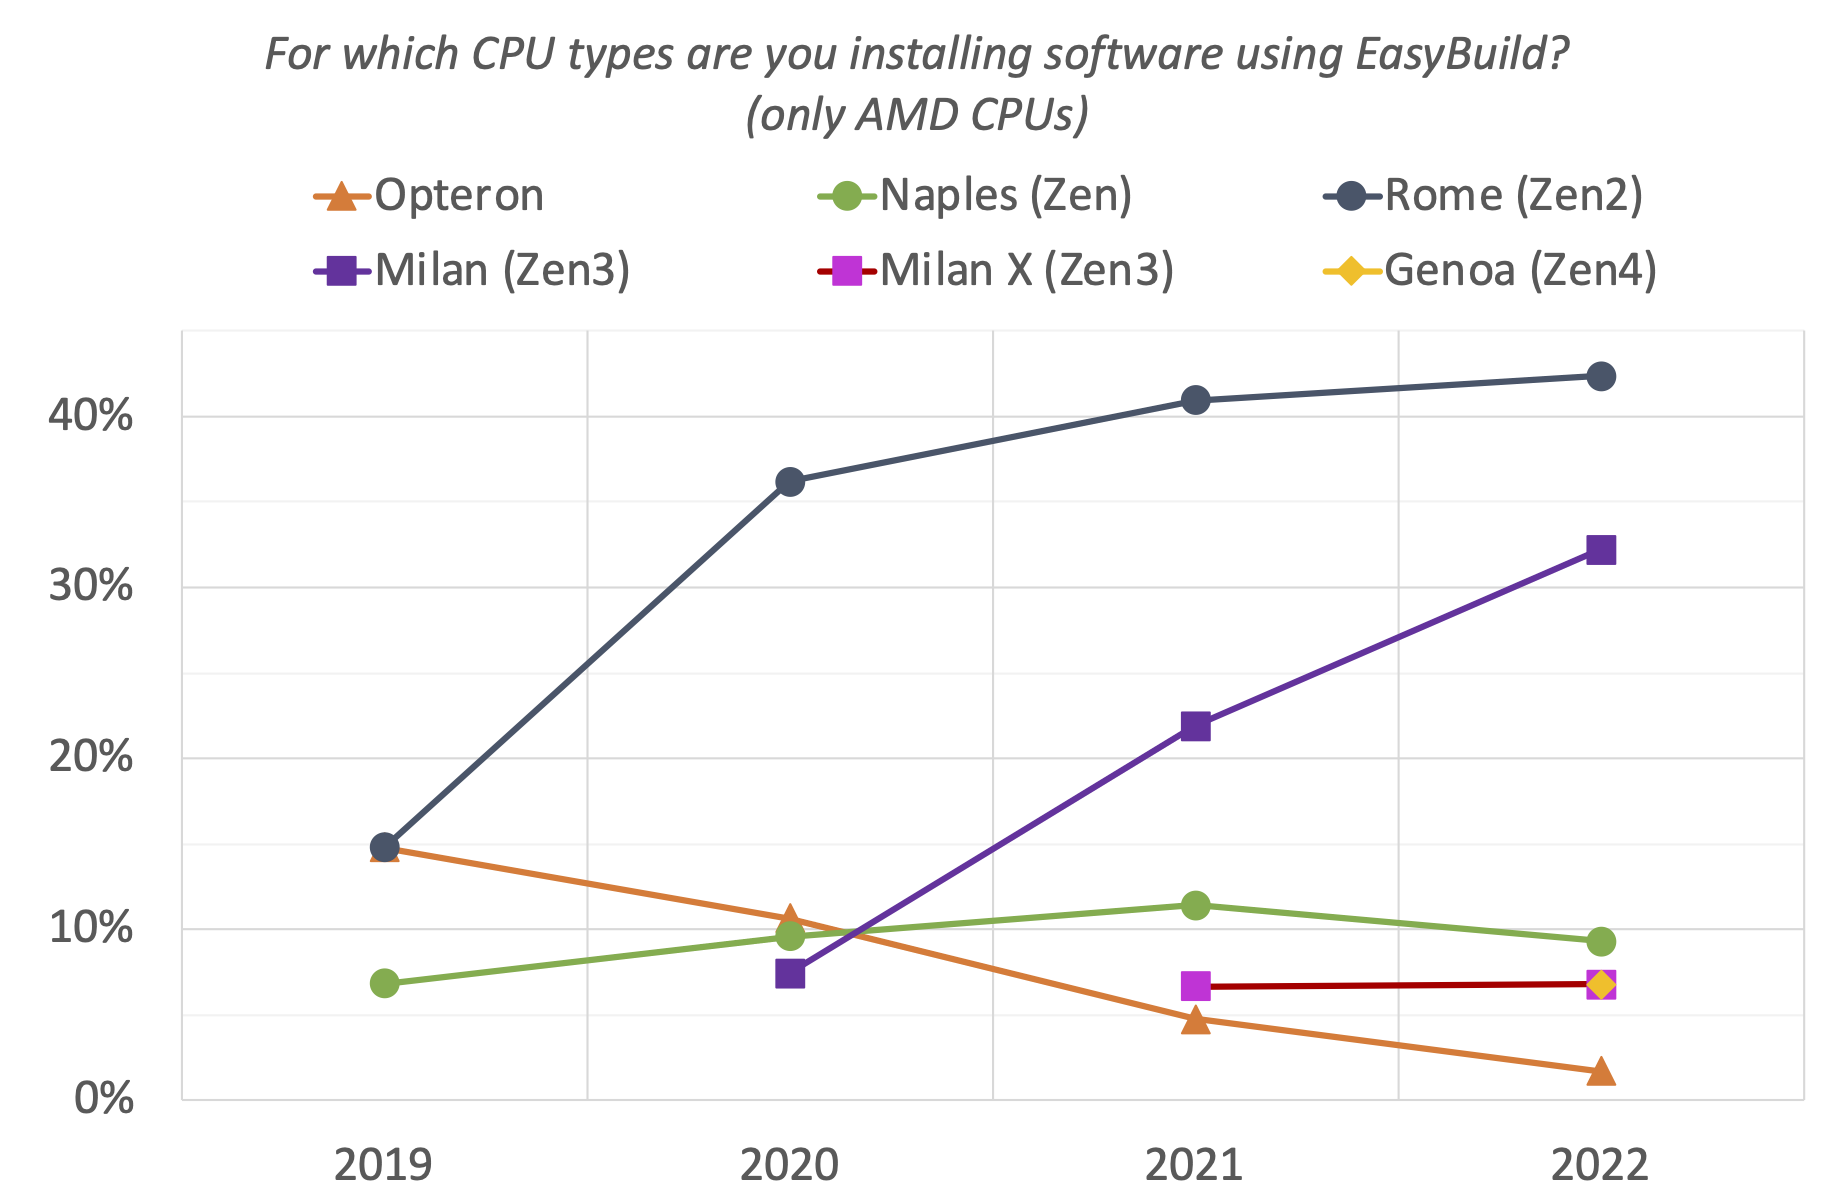 13. For which CPU types are you installing software using EasyBuild? (AMD only)